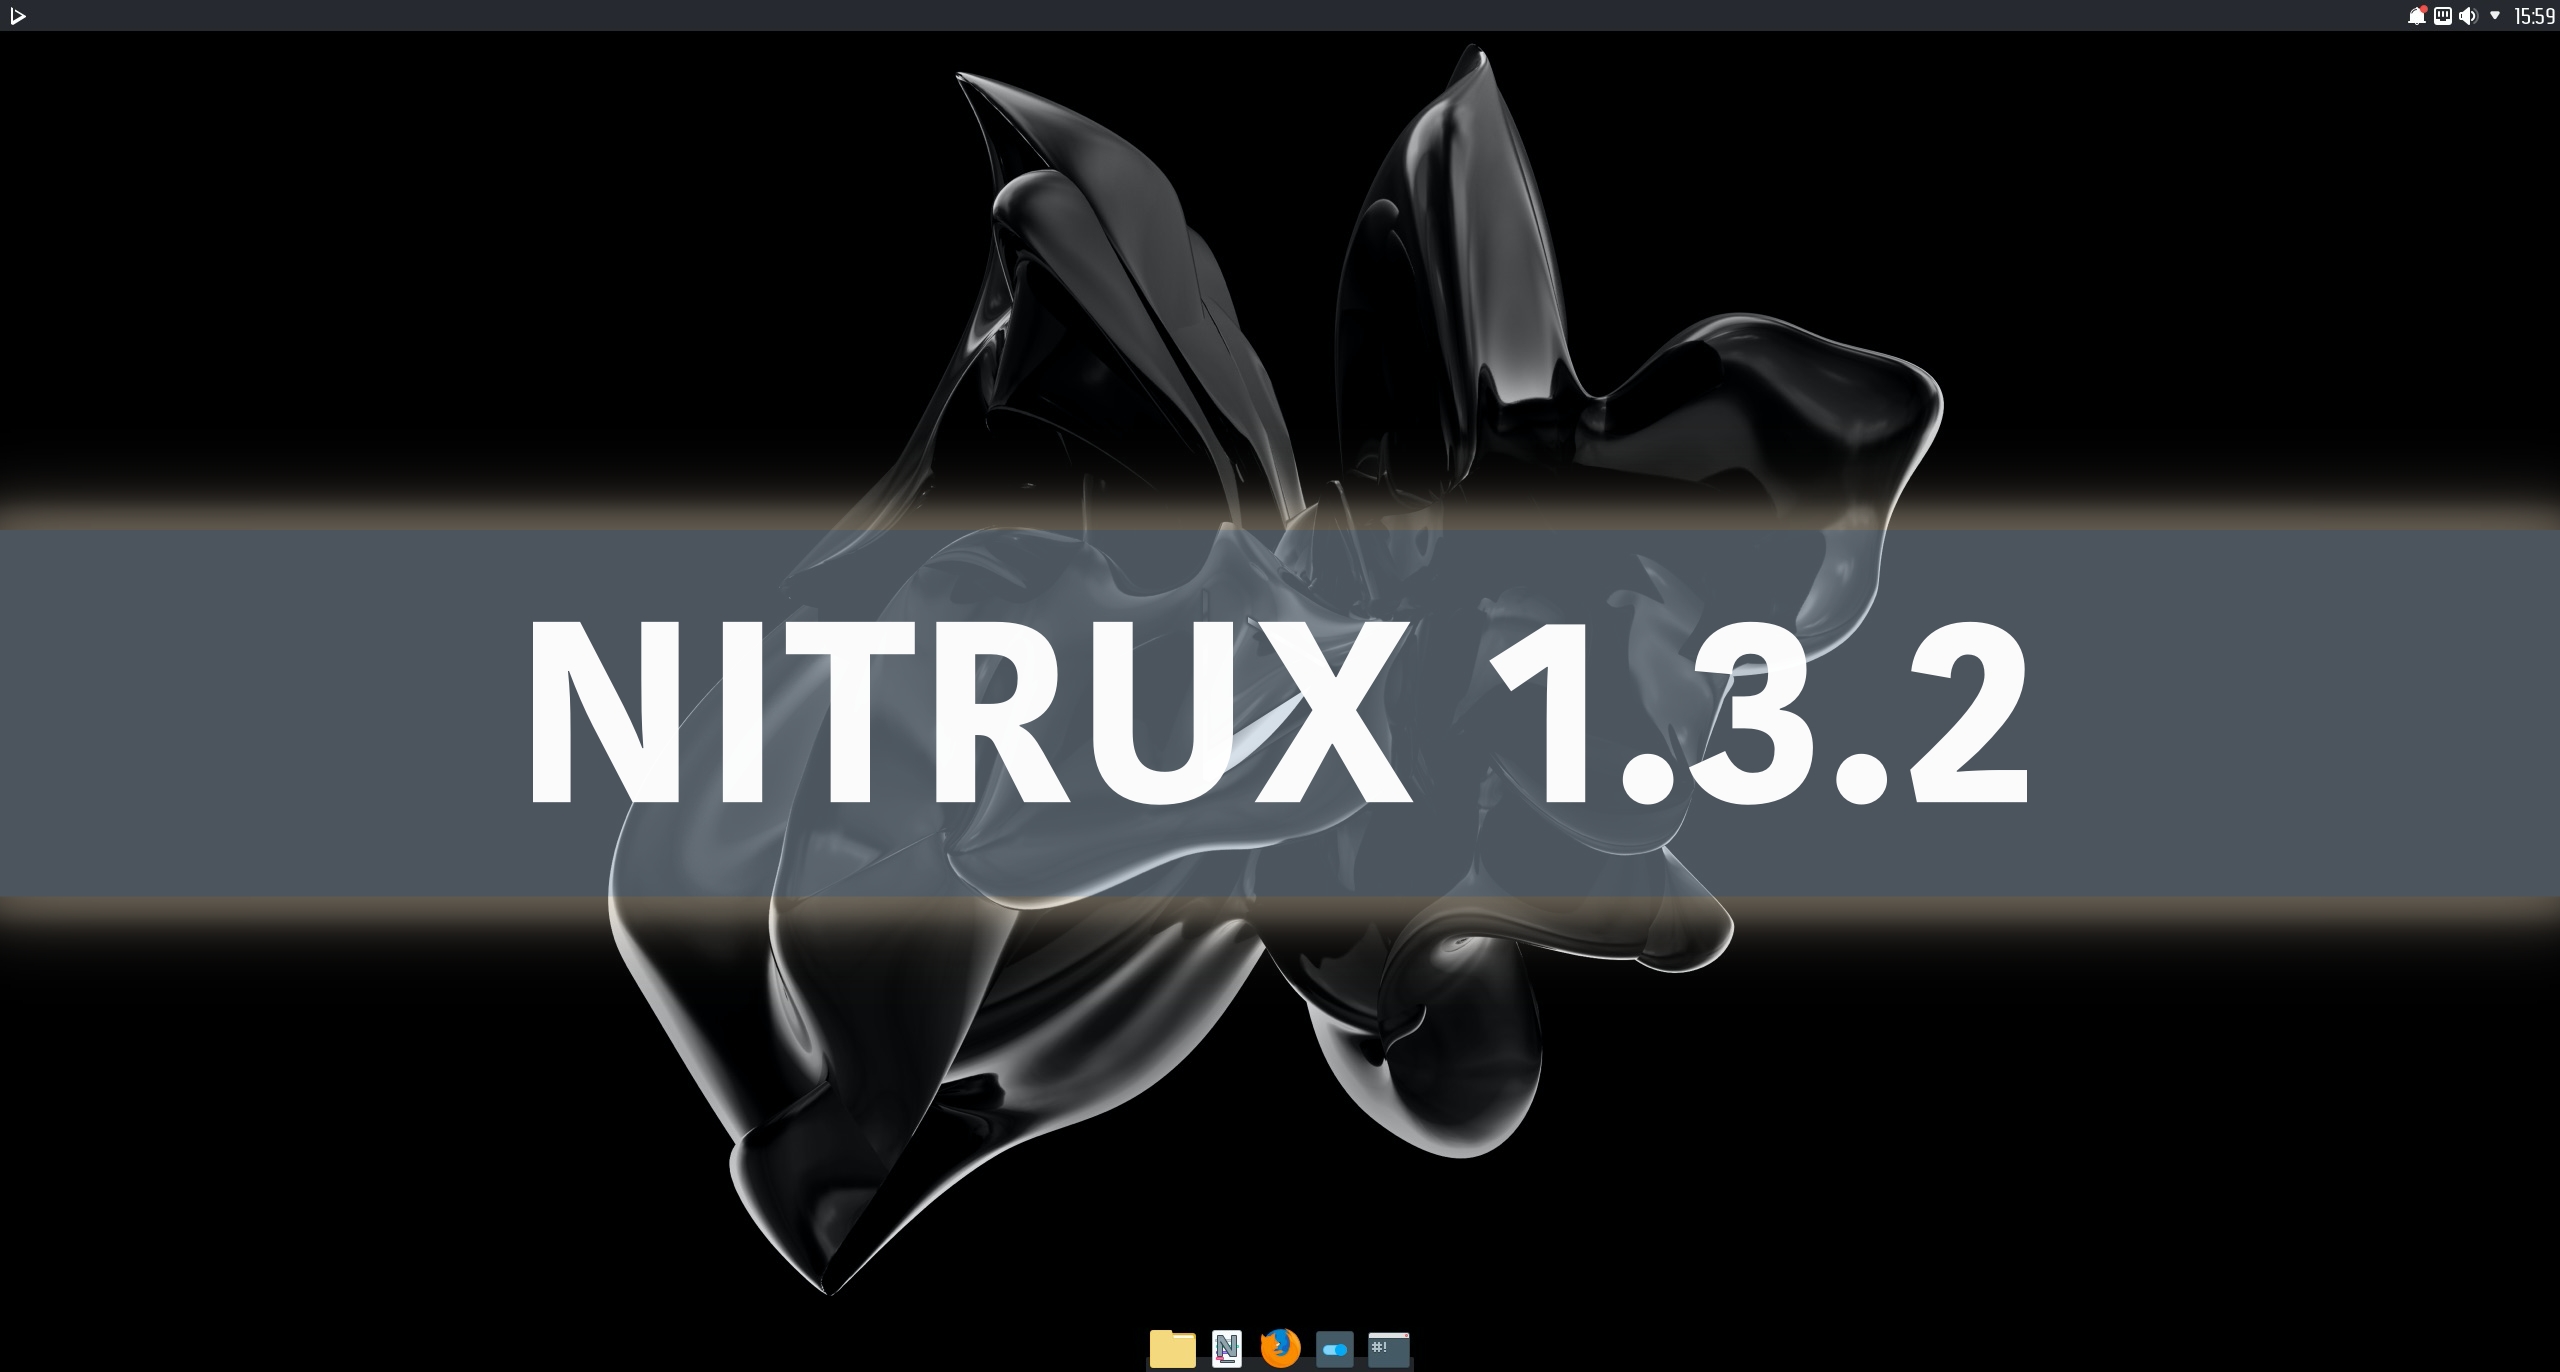 Nitrux 1.3.2 Drops Systemd in Favor of OpenRC, Adds Wayland Support